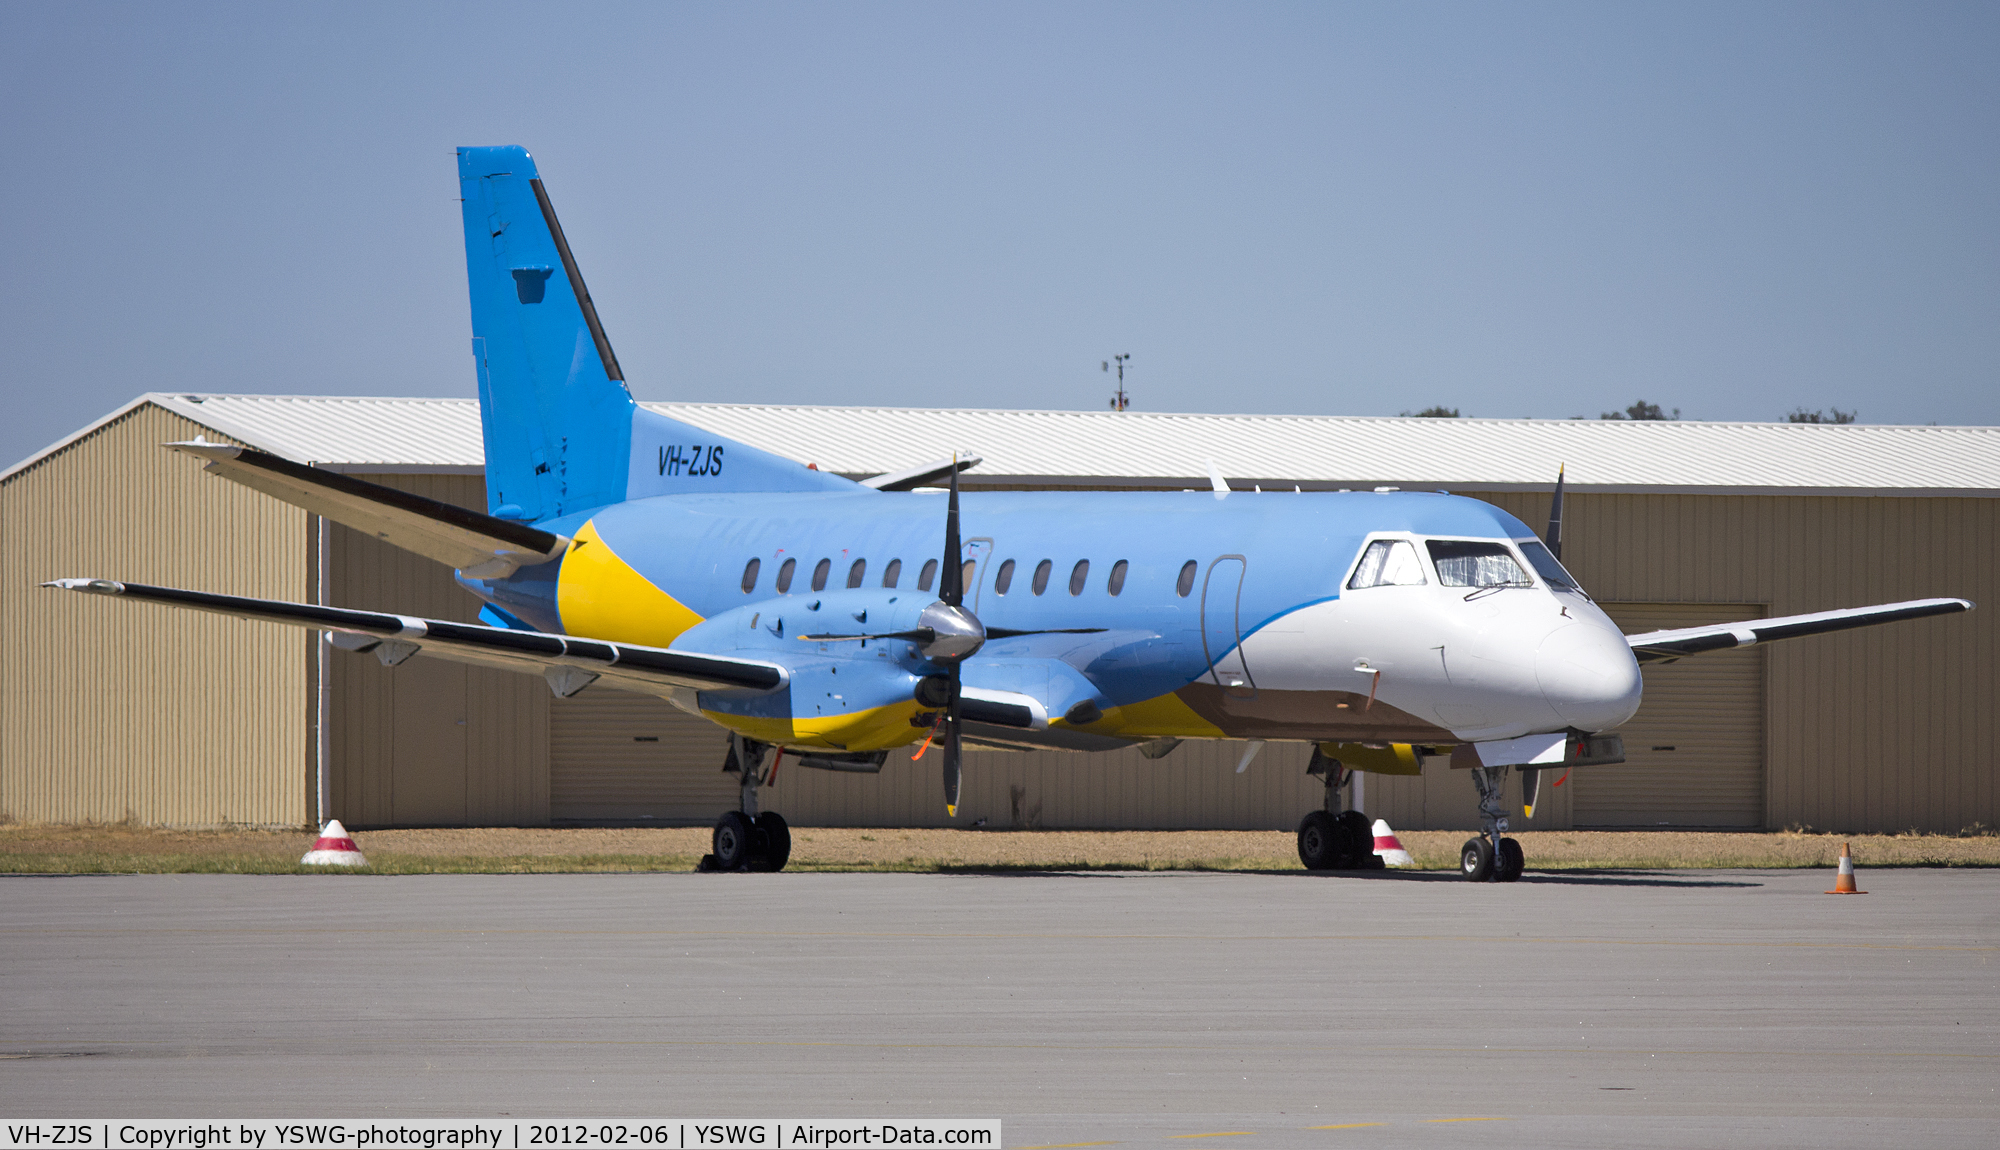 VH-ZJS, 1990 Saab 340B C/N 340B-186, Regional Express Holdings Limited, Saab 340B (VH-ZJS) in former Happy Air Travellers livery, on the tarmac at Wagga Wagga Airport.